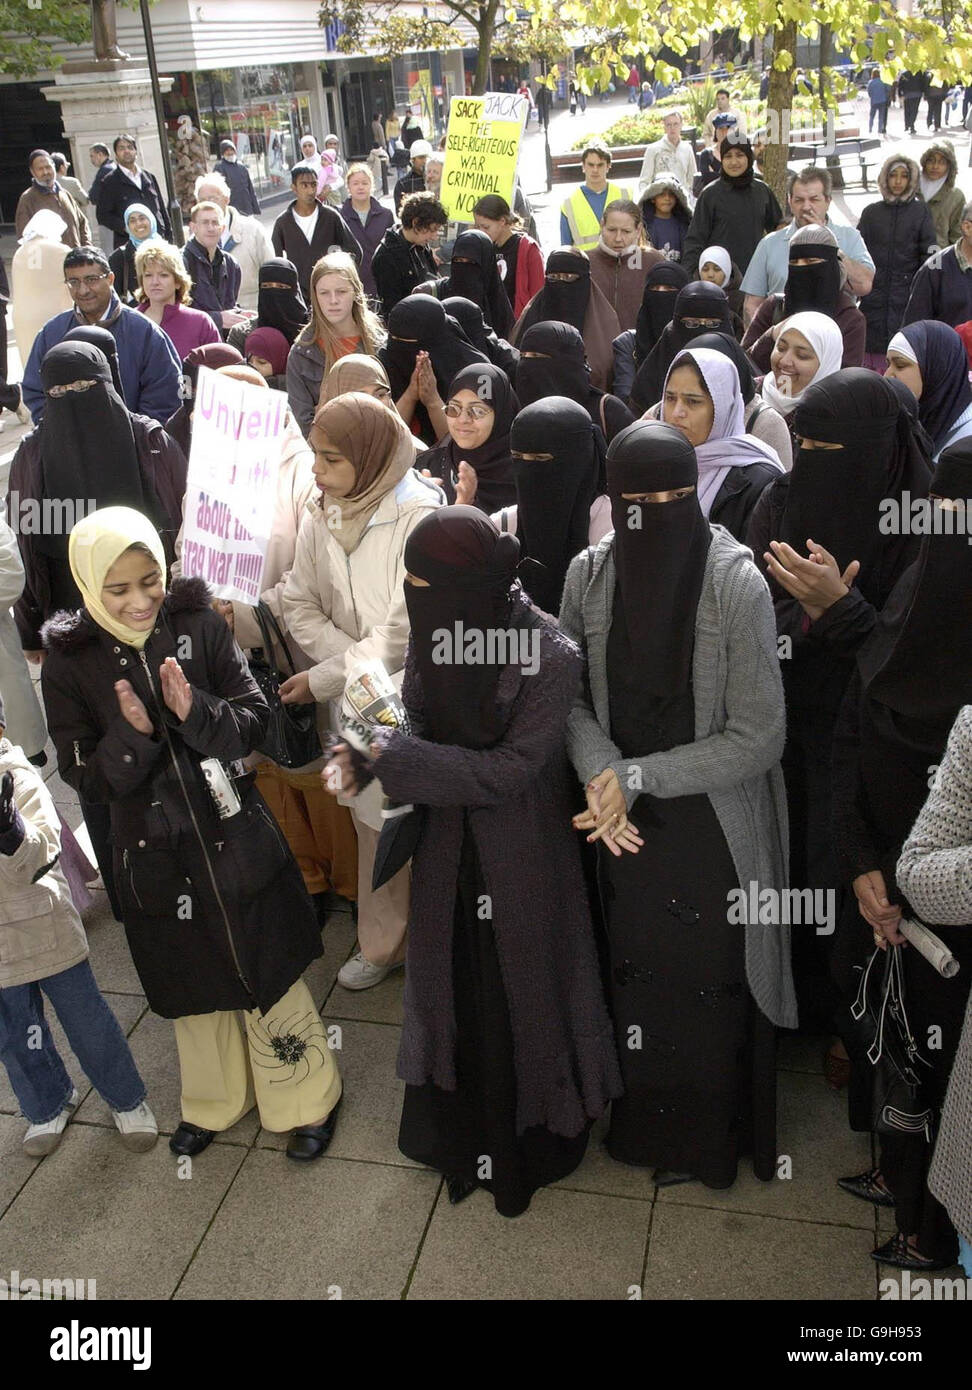 Muslim women protest against Jack Straw's comments regarding veils in the town centre of his constituency, Blackburn. The Commons Leader has stood by his controversial plea for women to discard their veils despite condemnation from Muslim leaders and many of his own constituents. Stock Photo